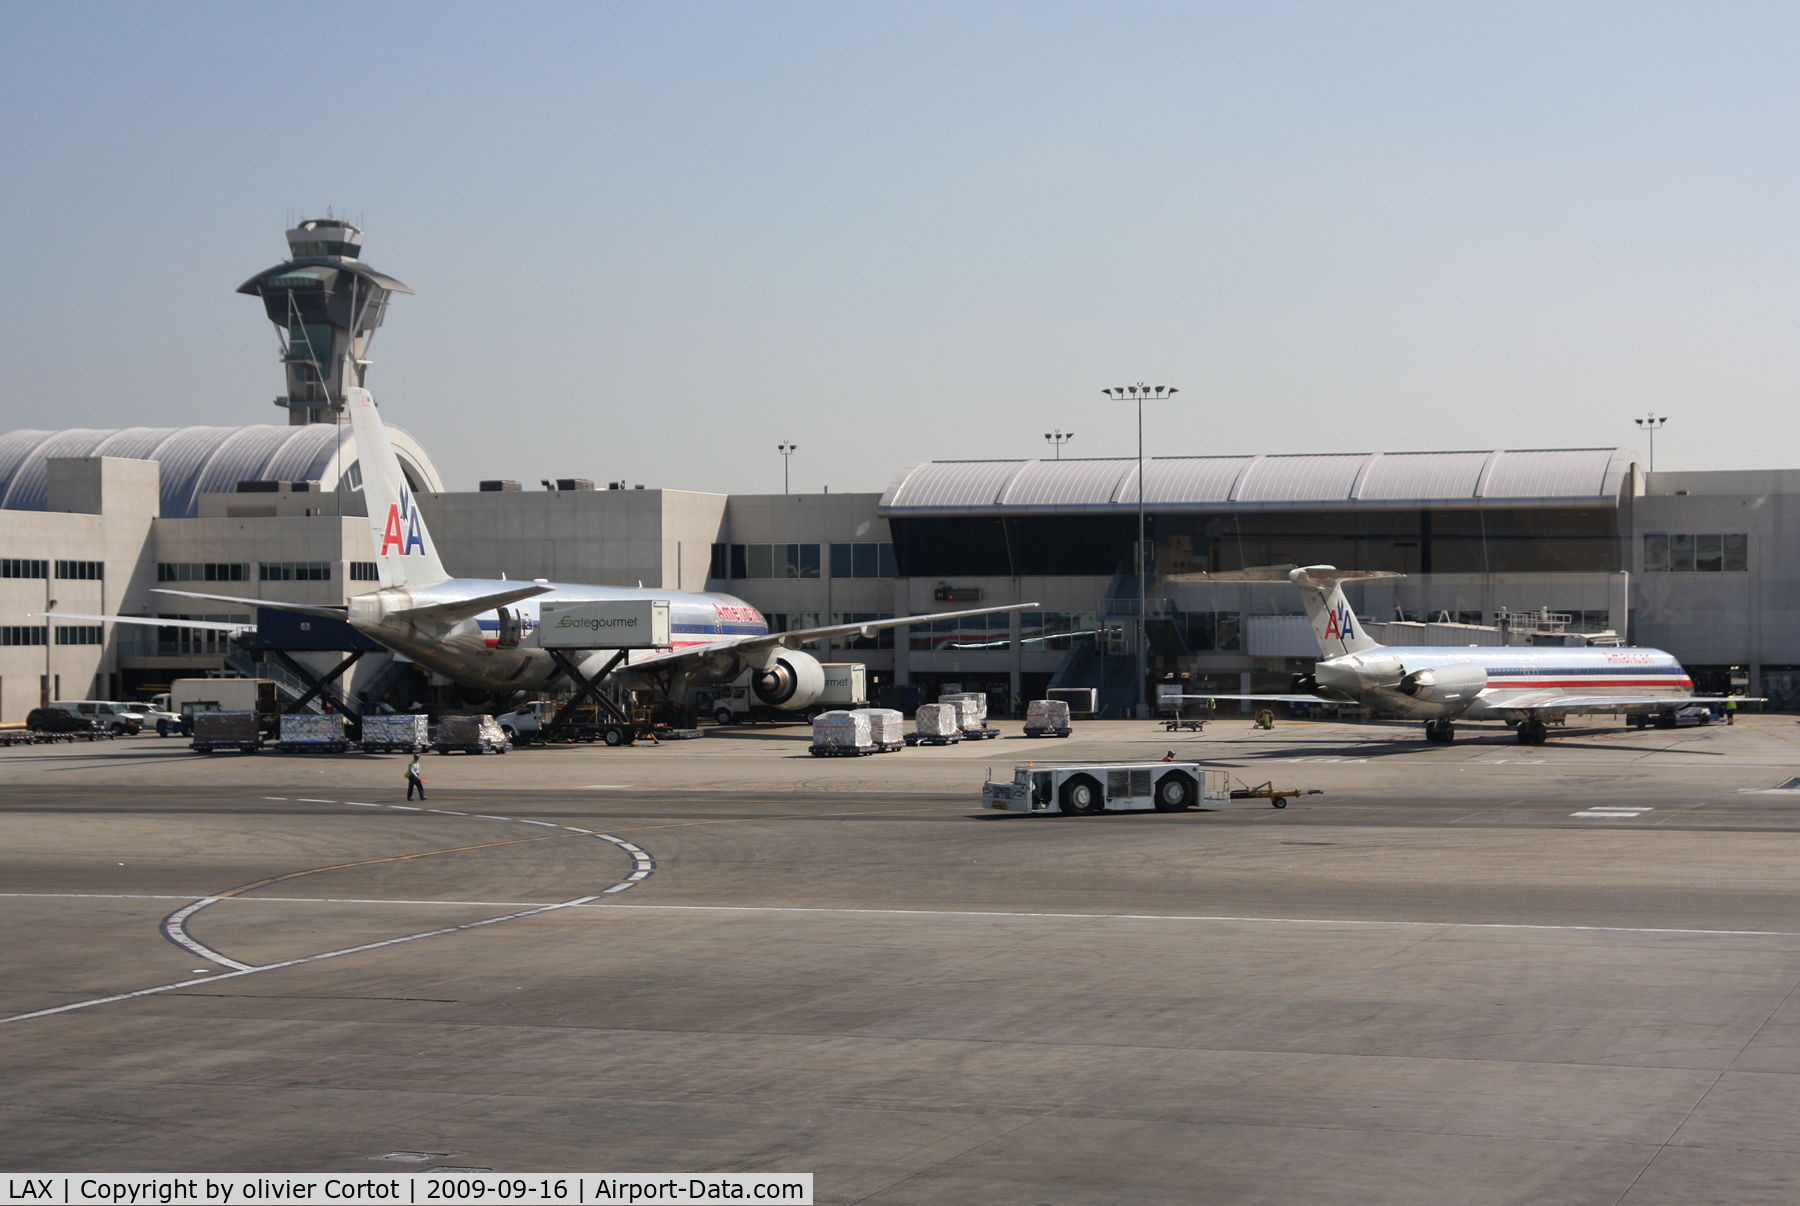 Los Angeles International Airport (LAX) - View on some AA aircrafts from the Air Tahiti Nui terminal.